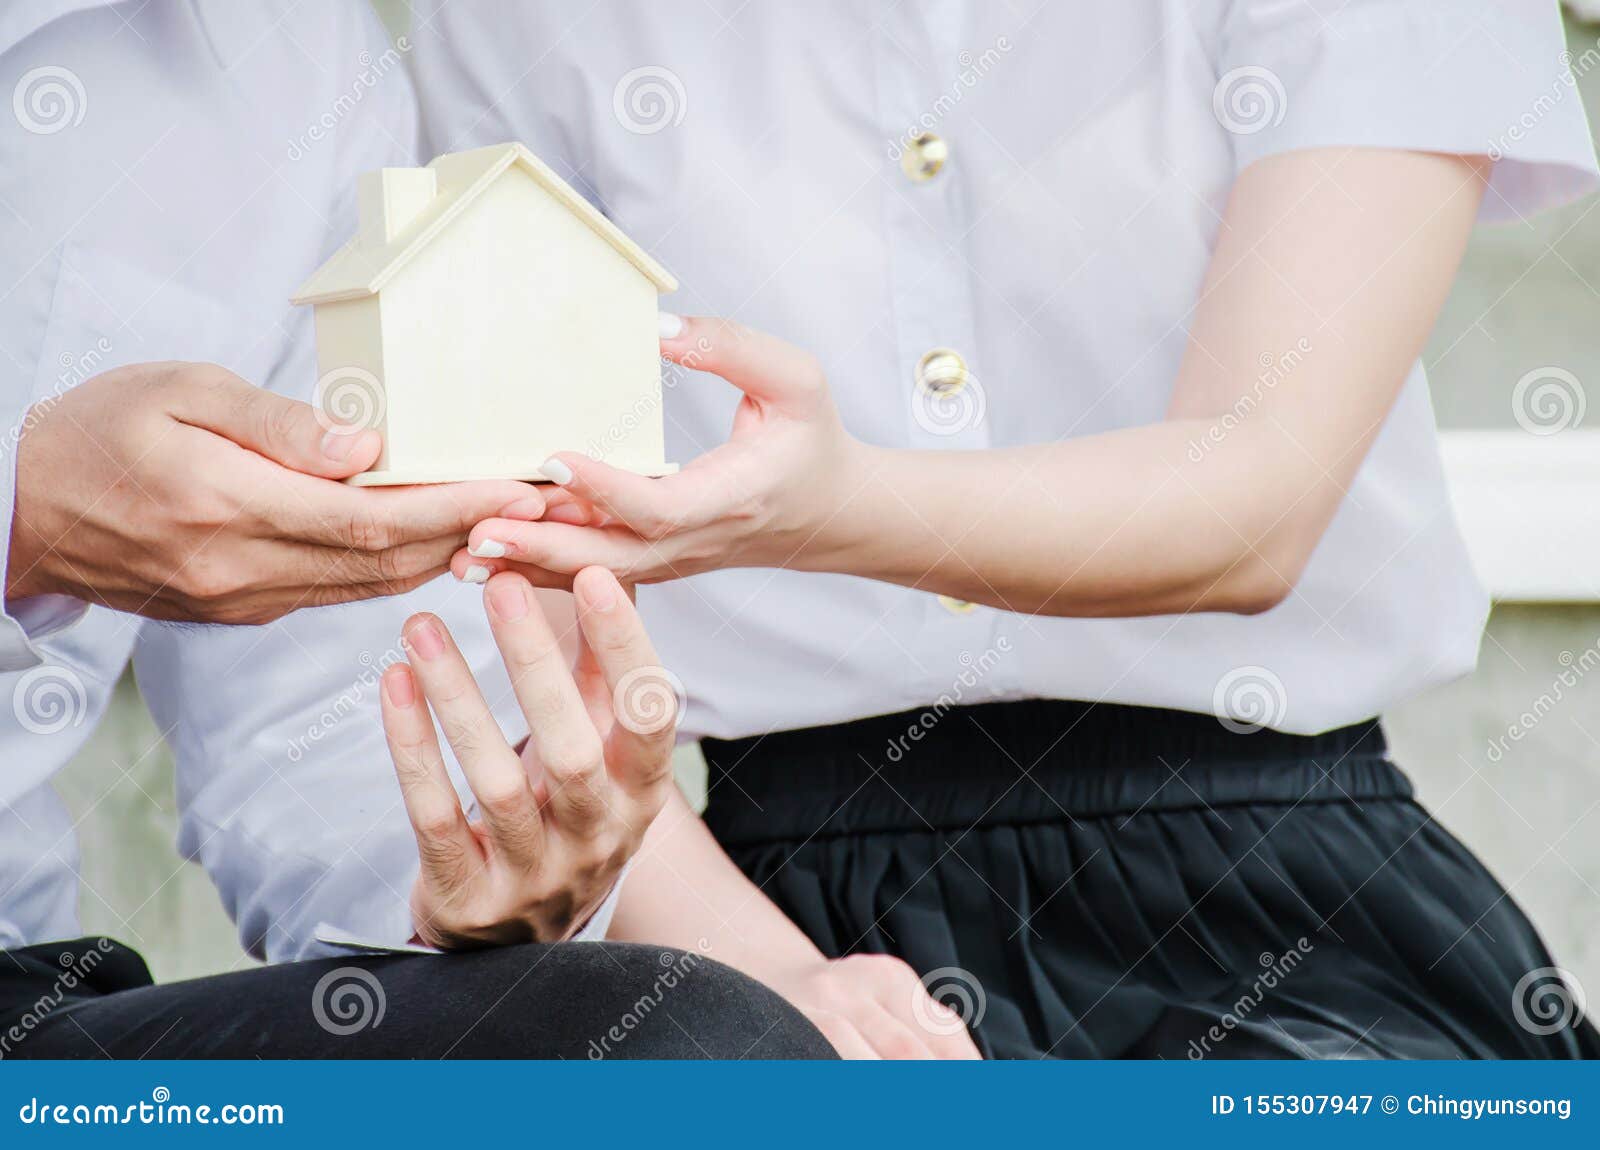 closeup hands of an couple students holding a little house together, concept of sustaining a house between two people.